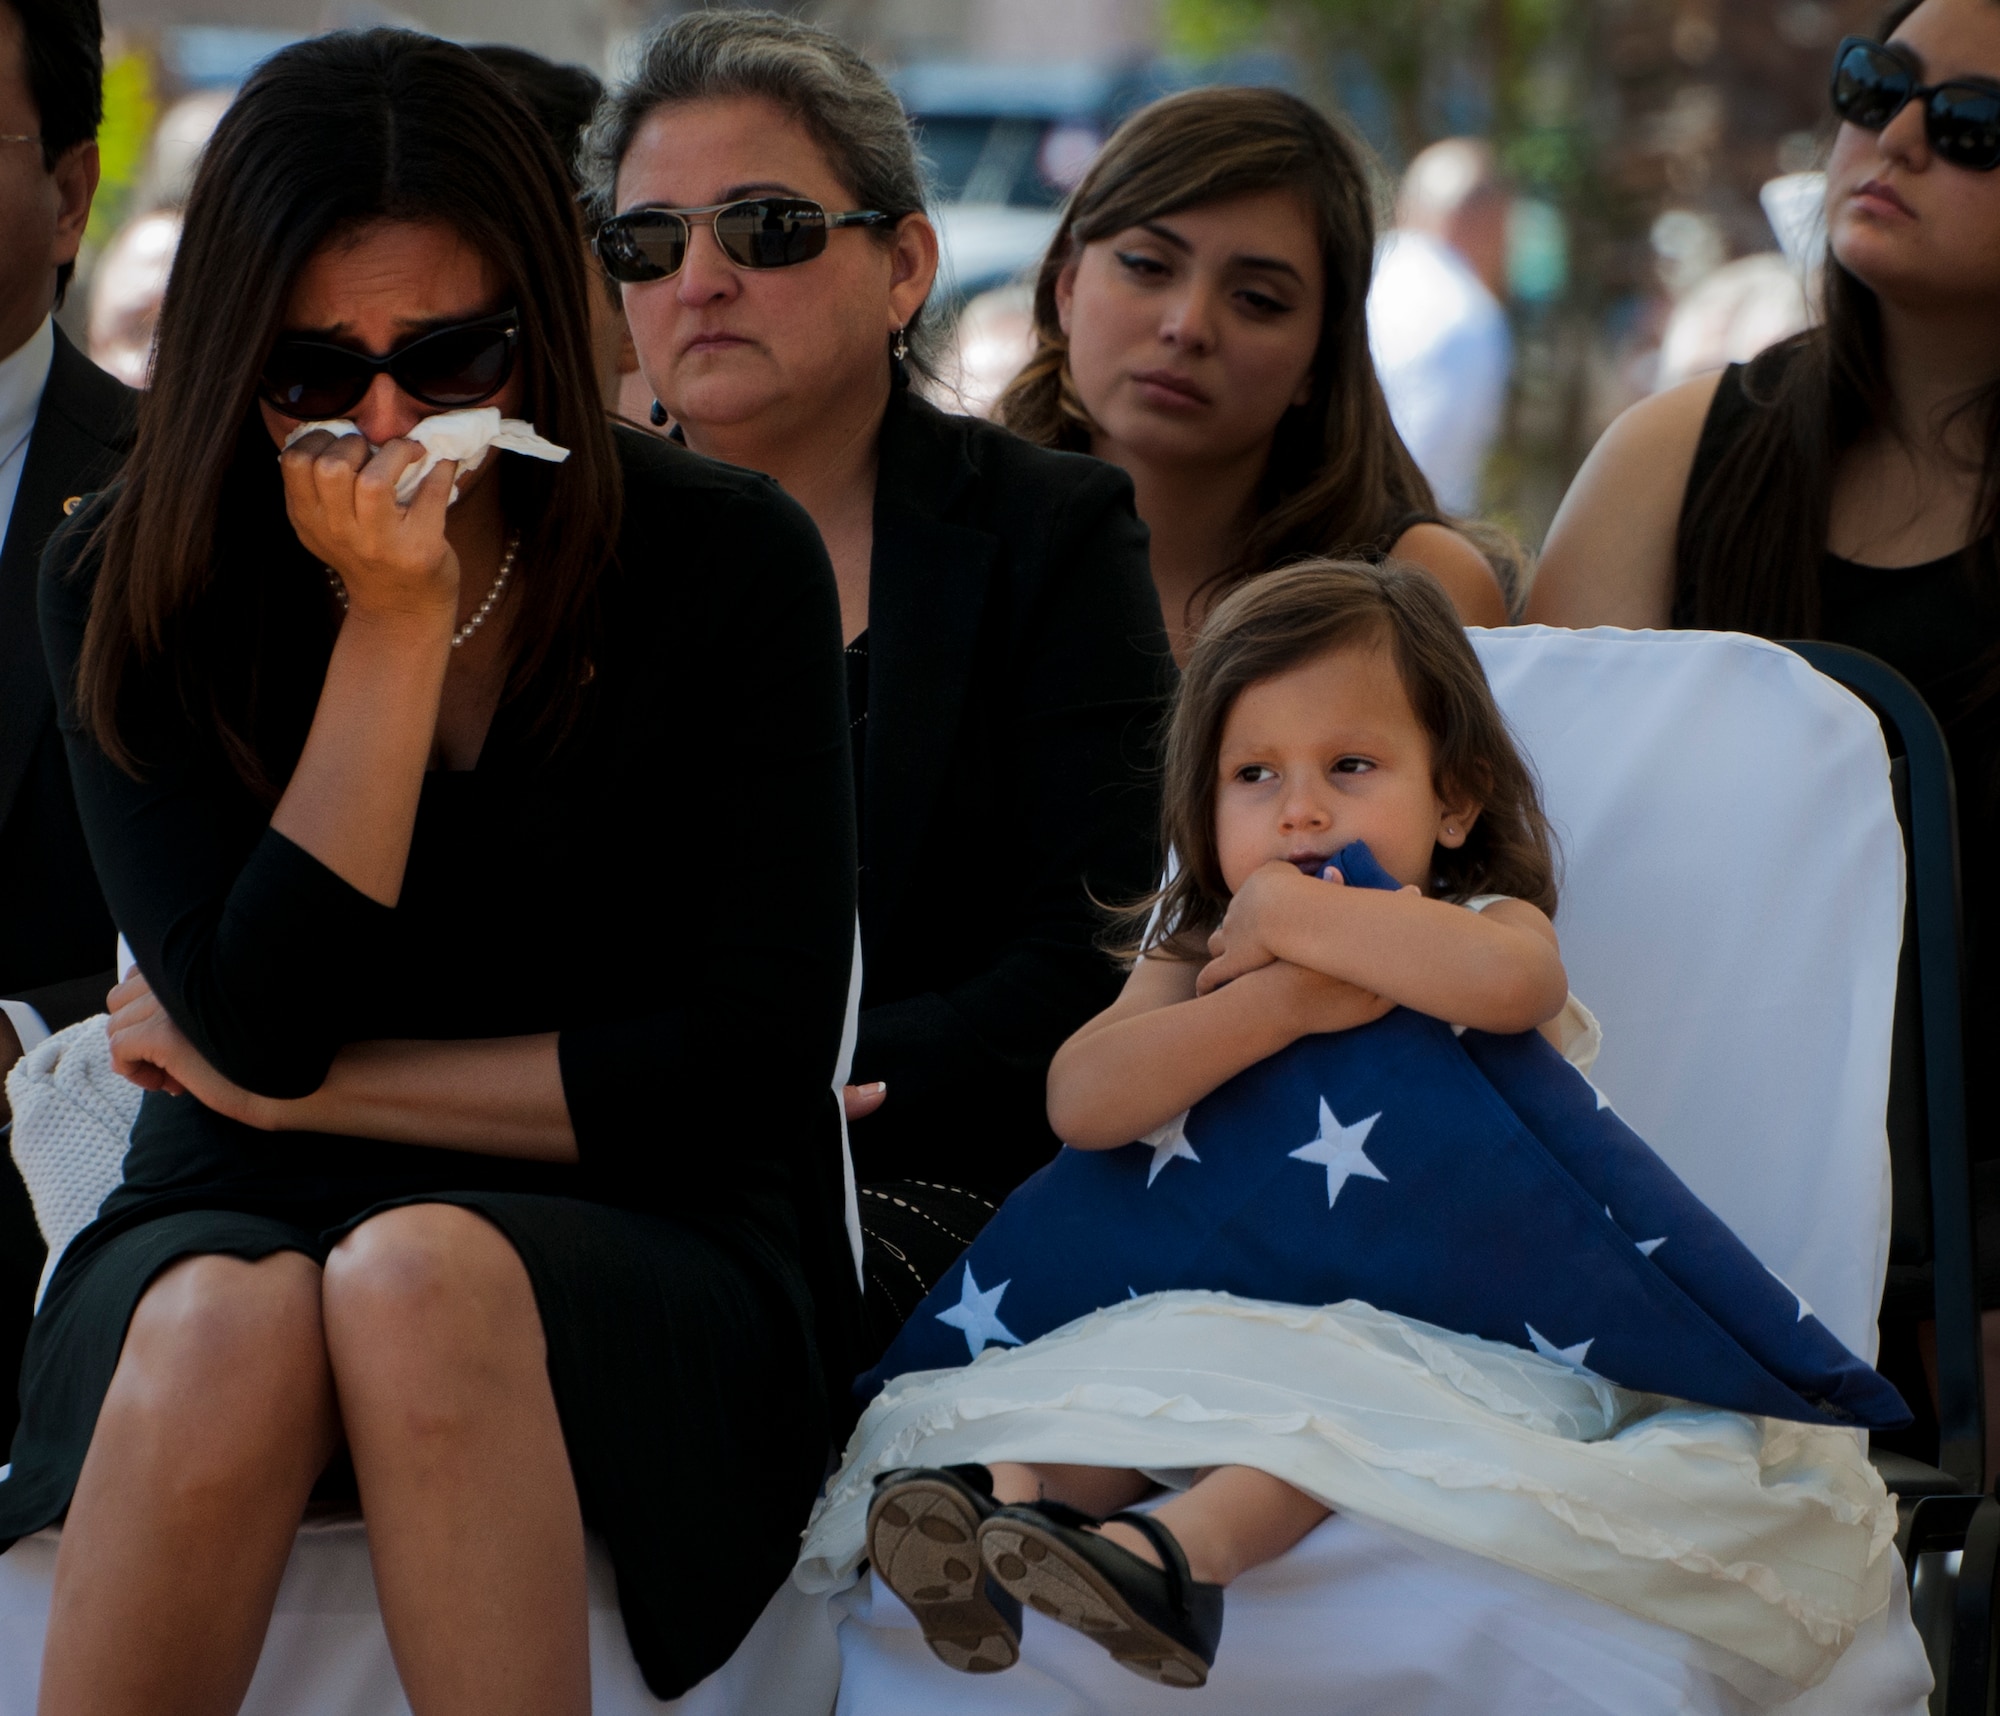 Vicki Baker, widow of Sgt. 1st Class Jeffrey Baker, weeps while their daughter, Audrey, holds a flag presented to her during the 45th Annual Explosive Ordnance Disposal Memorial Ceremony May 3, at Eglin Air Force Base, Fla. Eight new names of Army and Marine EOD technicians, who lost their lives, were added to the Memorial Wall this year.  The all-service total now stands at 306. (U.S. Air Force photo/Tech. Sgt. Sam King)